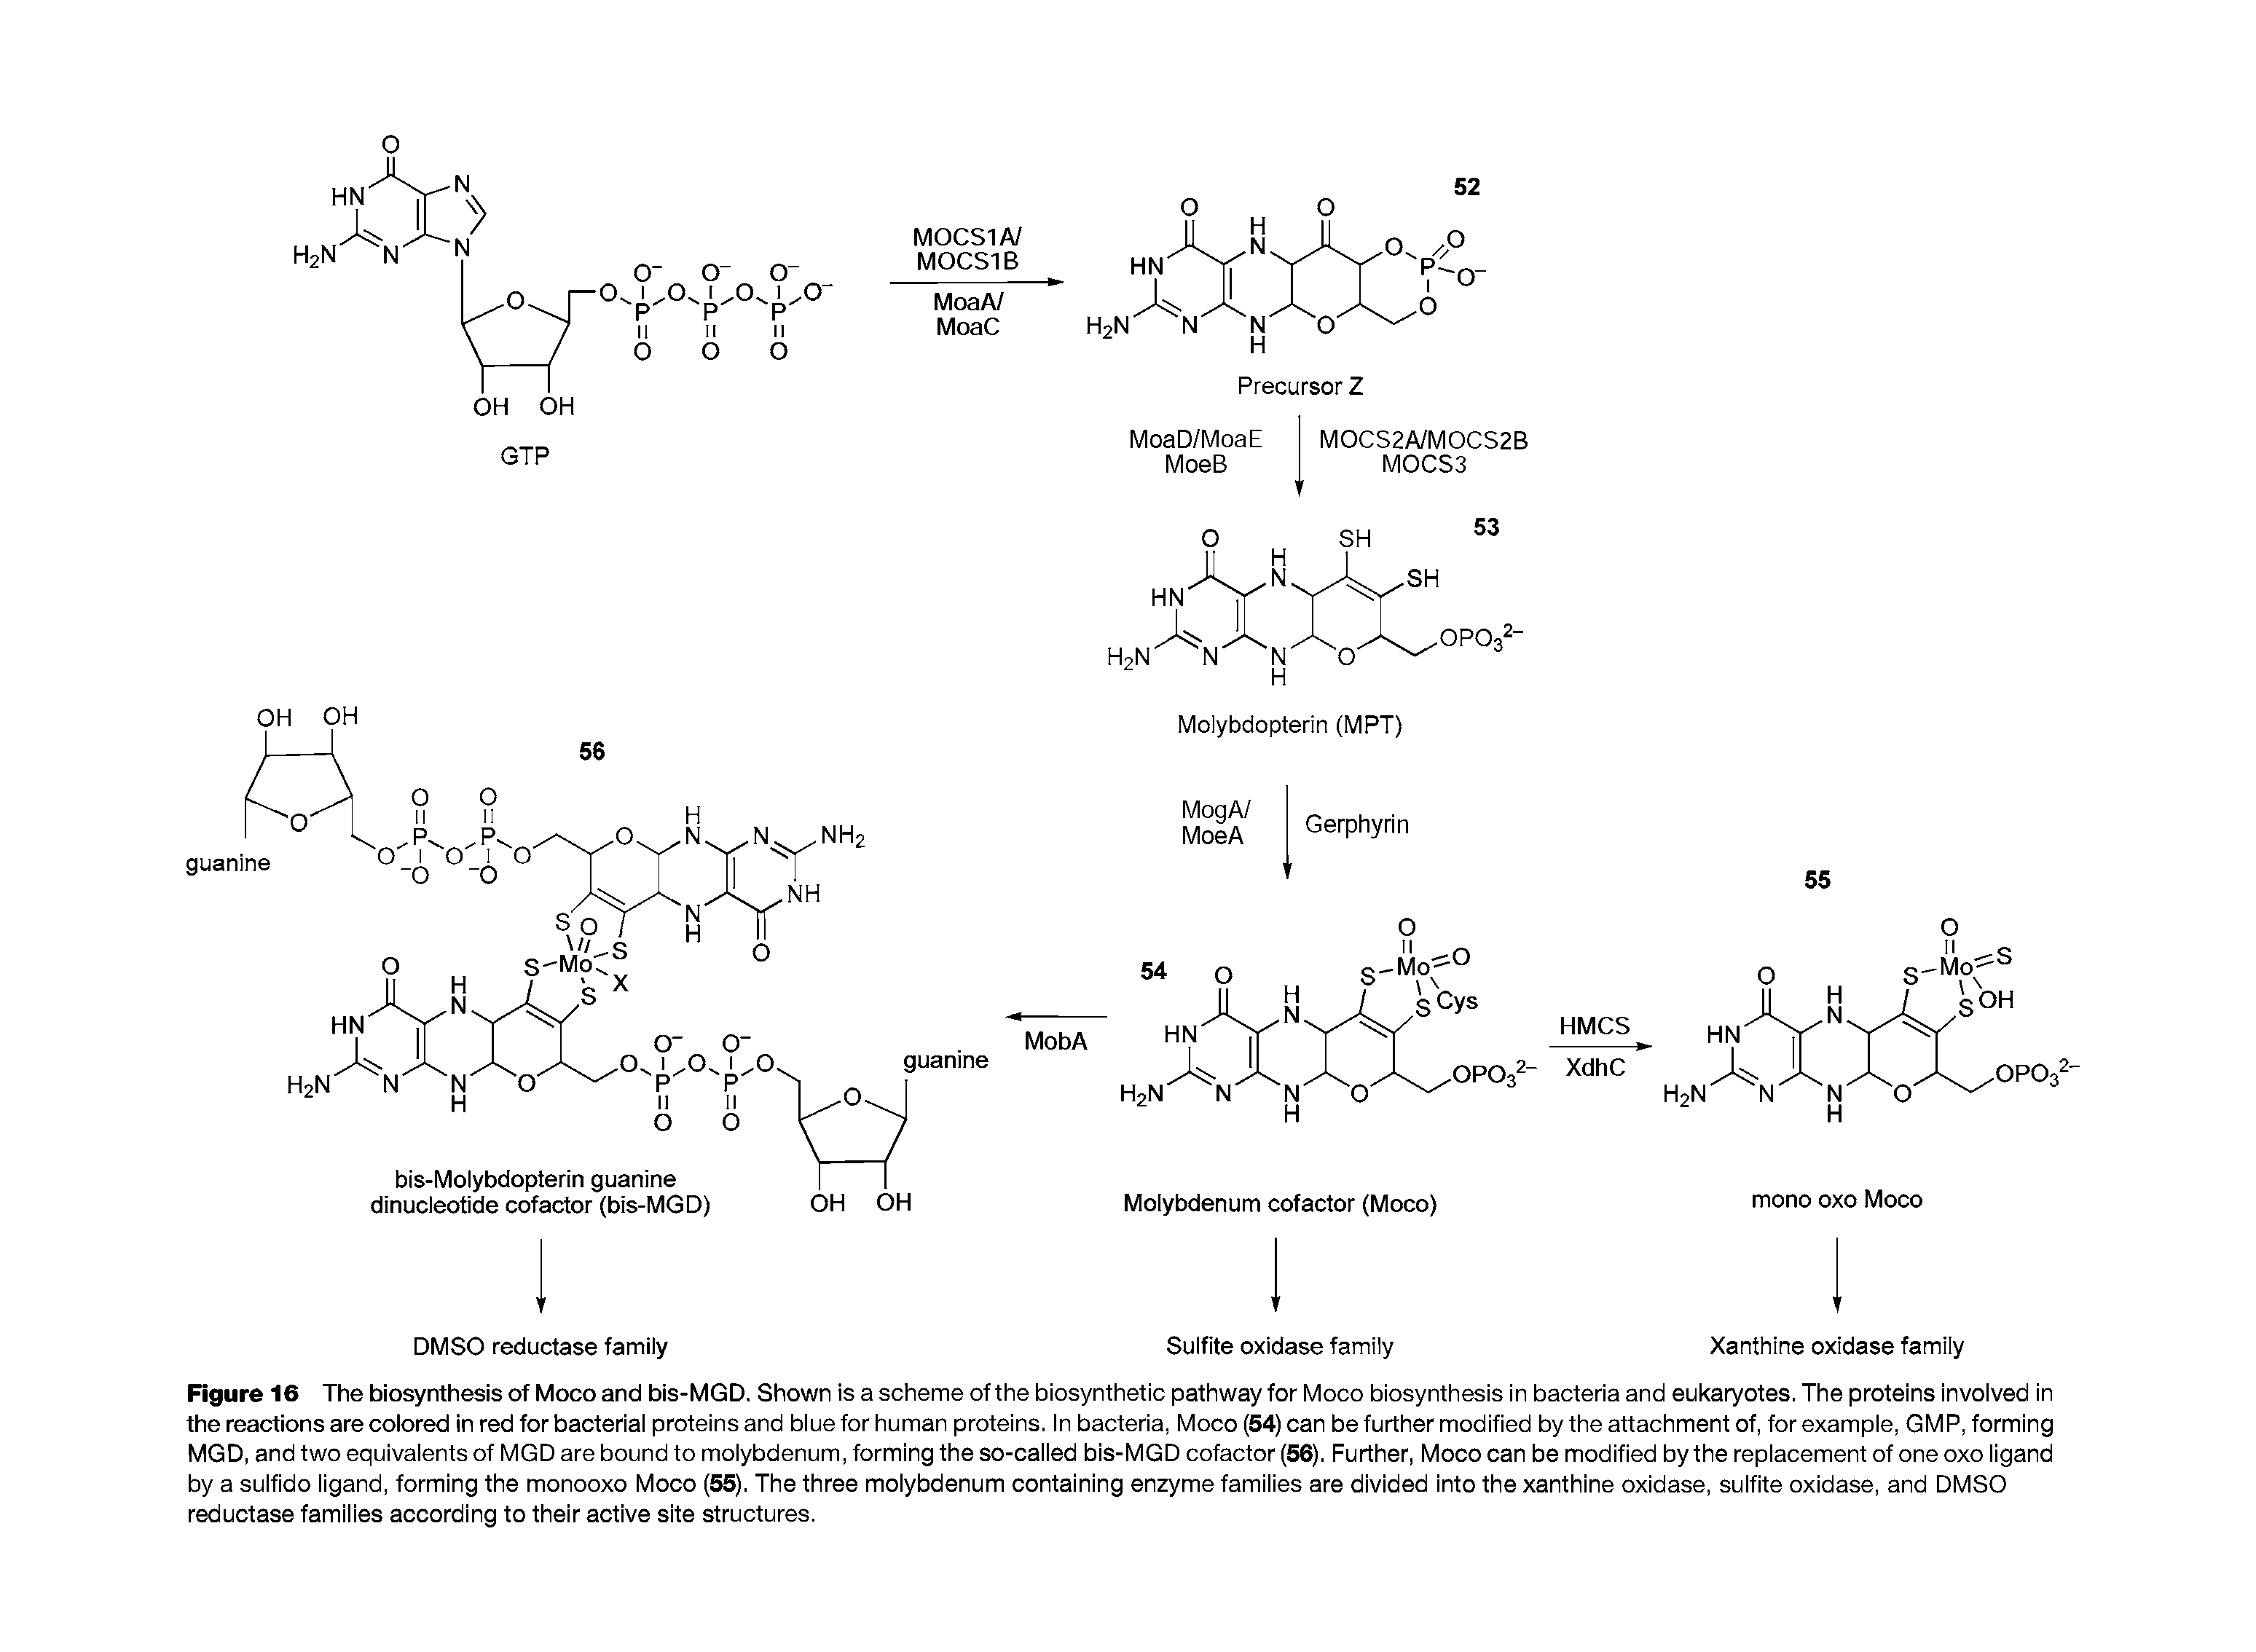 Figure 16 The biosynthesis of Moco and bis-MGD. Shown is a scheme of the biosynthetic pathway for Moco biosynthesis in bacteria and eukaryotes. The proteins involved in the reactions are colored in red for bacterial proteins and blue for human proteins. In bacteria, Moco (54) can be further modified by the attachment of, for example, GMP, forming MGD, and two equivalents of MGDare bound to molybdenum, forming the so-called bis-MGD cofactor (56). Further, Moco can be modified by the replacement of one 0x0 ligand by a sulfido ligand, forming the monooxo Moco (55). The three molybdenum containing enzyme families are divided into the xanthine oxidase, sulfite oxidase, and DMSO reductase families according to their active site structures.